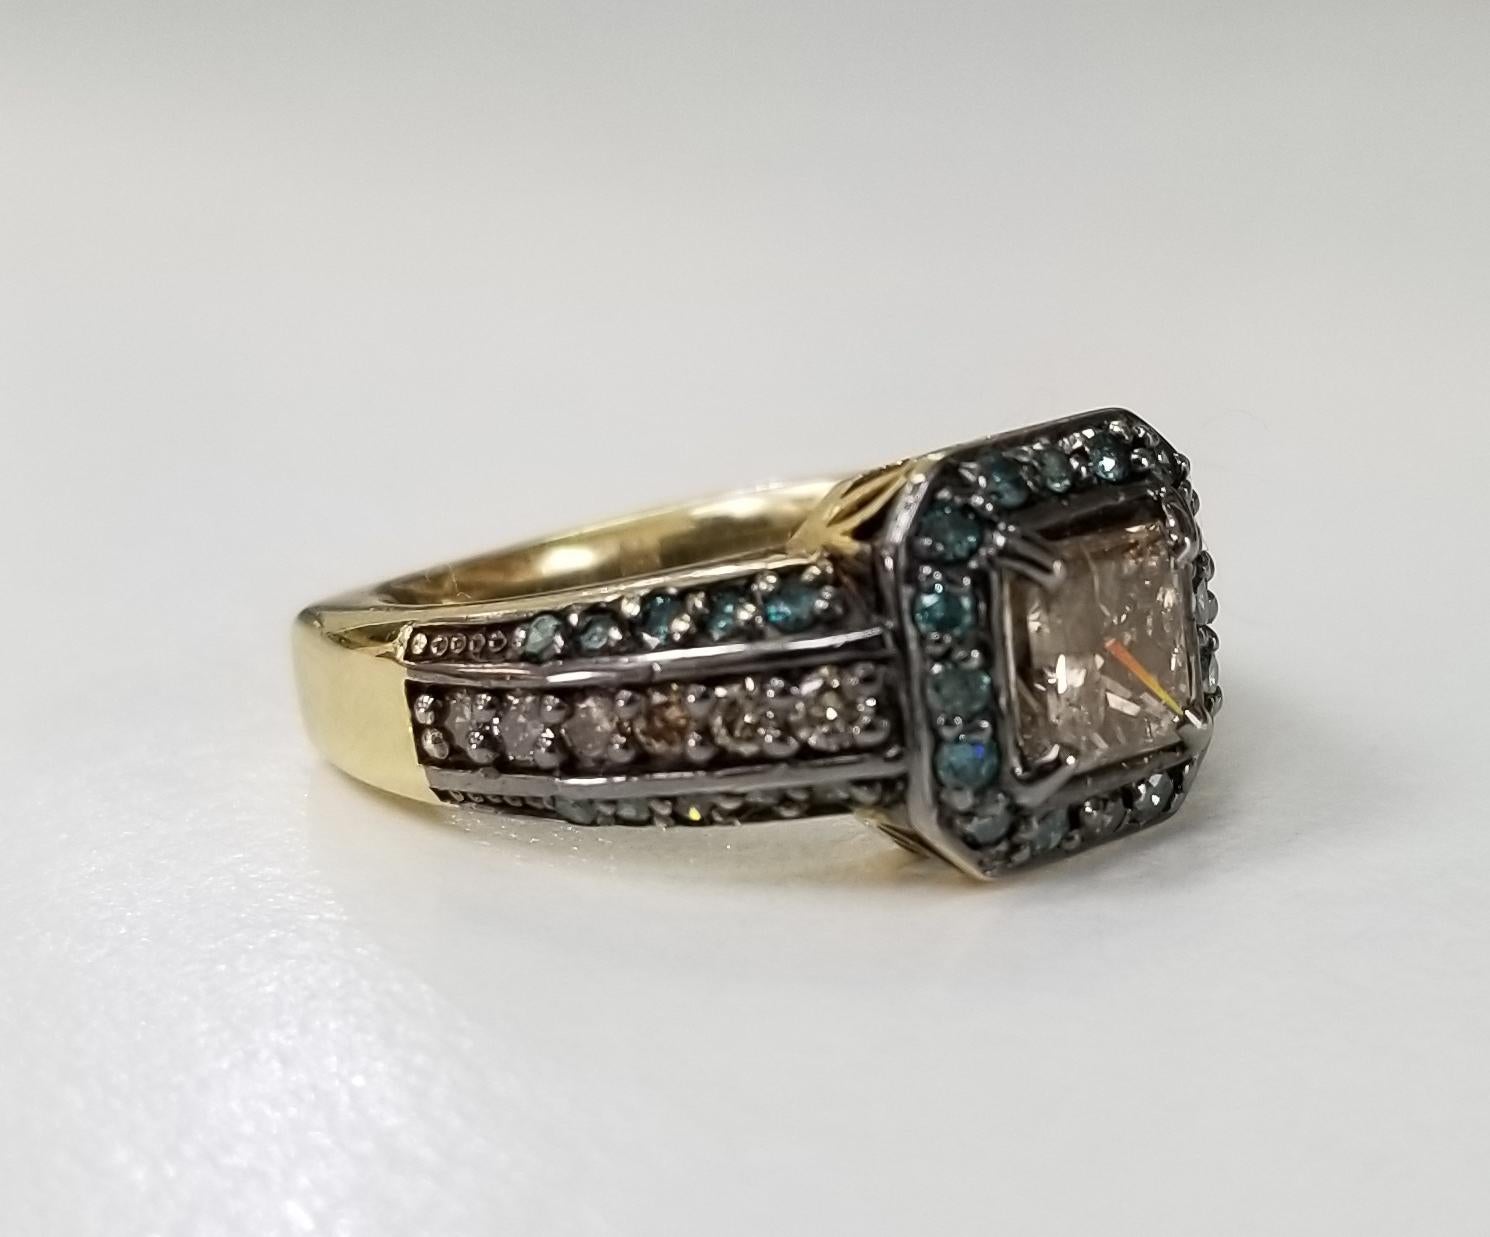 14k yellow gold brown and blue diamond halo ring containing 1 princess cut diamond weighing 1.00cts. also 12 round full cut brown diamonds weighing .30pts. and 36 round full cut blue diamonds weighing .50pts.   Top halo has been black rhodium.  This